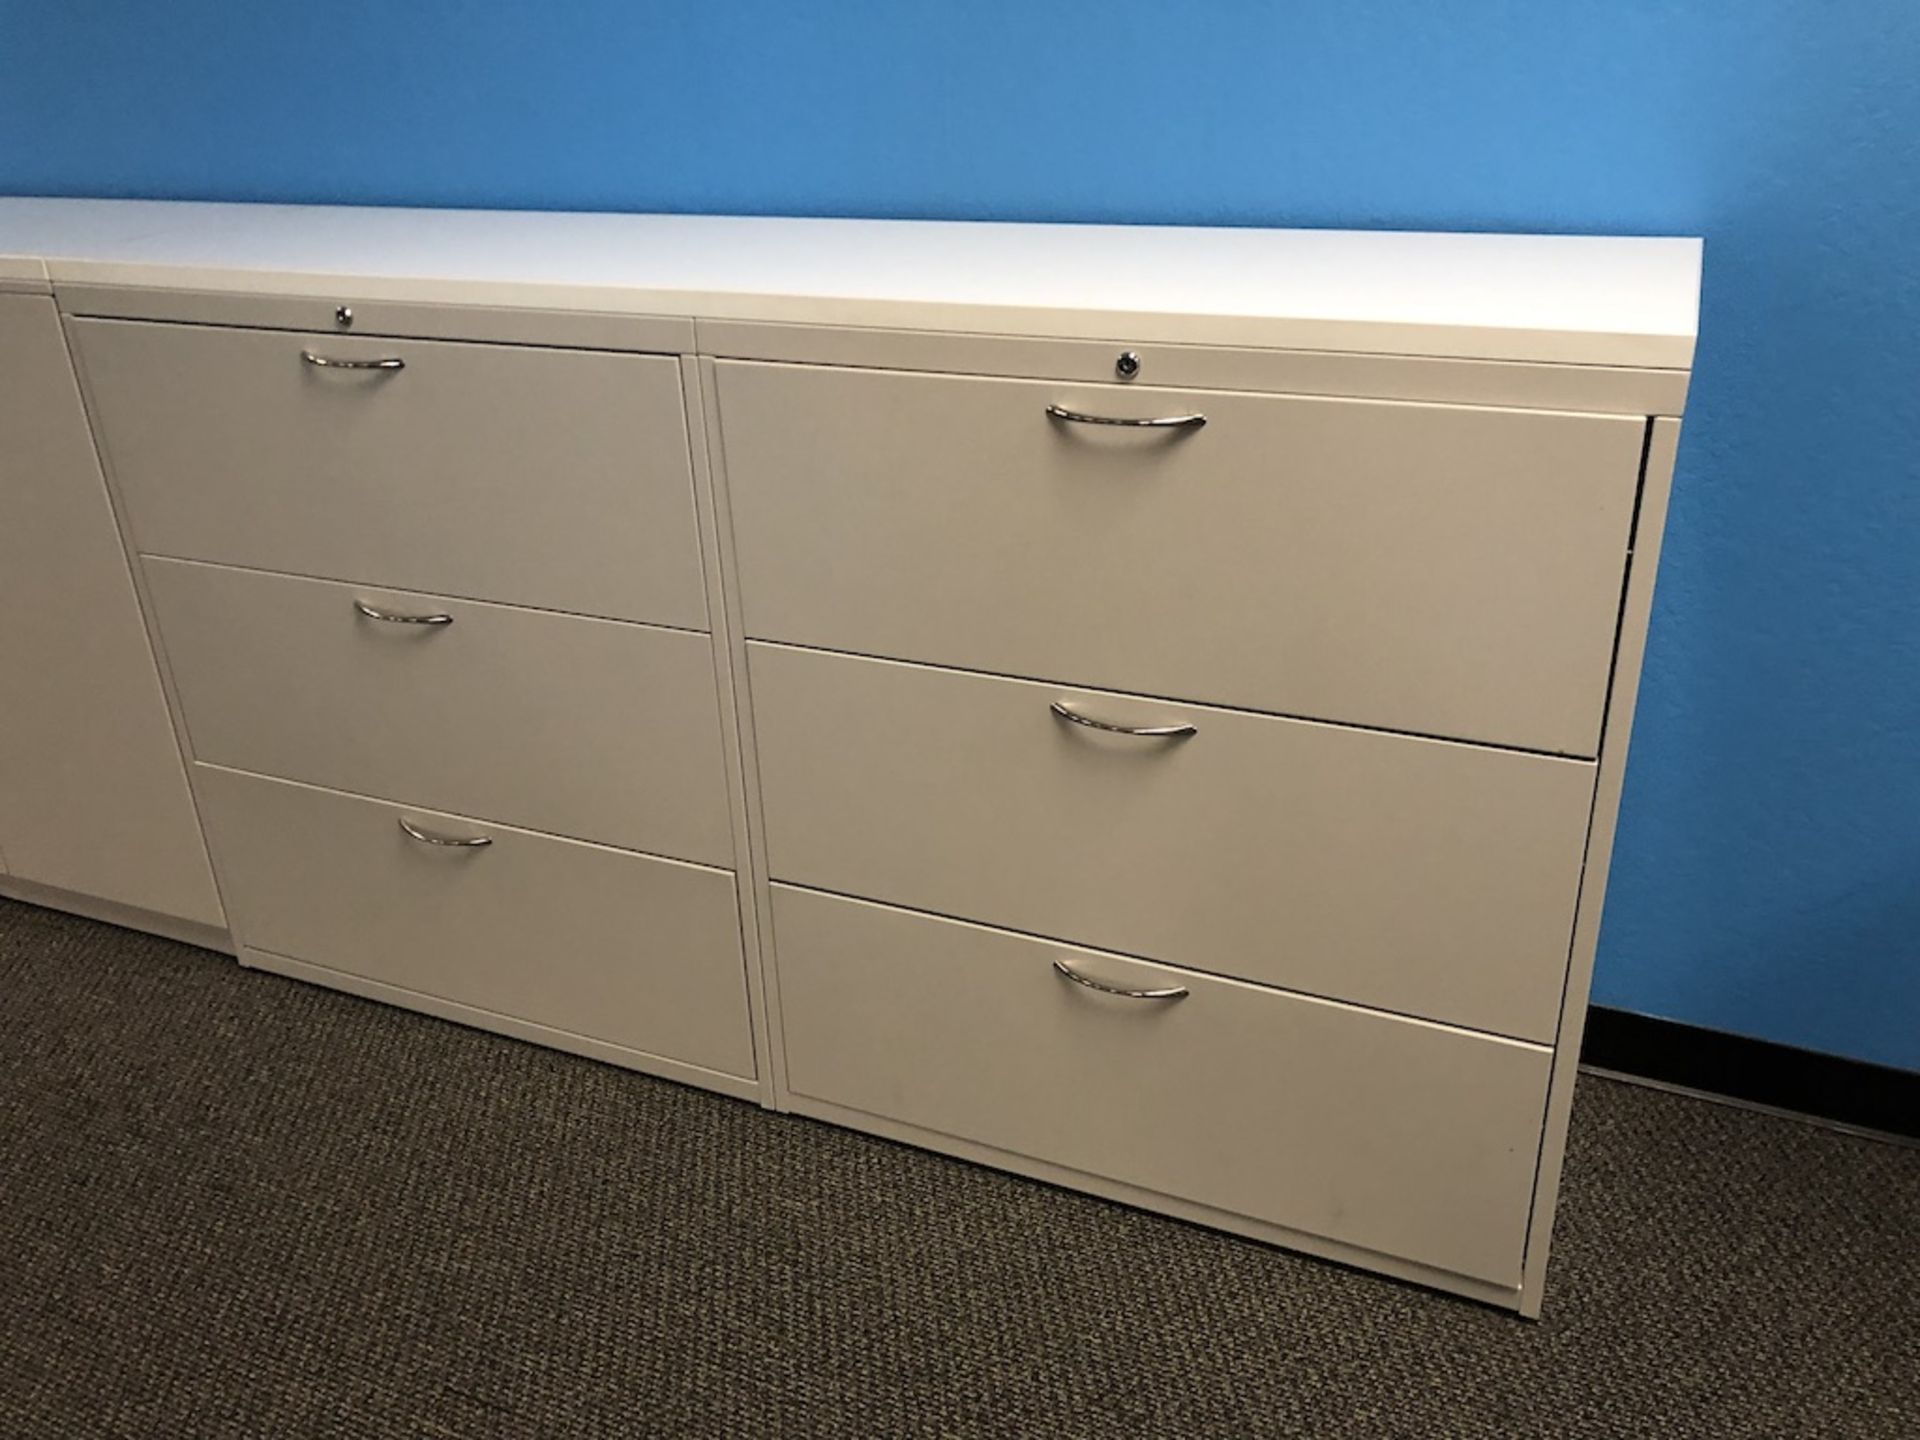 6 DRAWER OFFICE CABINET 6FT L X 18IN W X 41IN H   SCHNEIDER ELECTRIC- 6611 PRESTON AVE SUITE A - Image 3 of 4